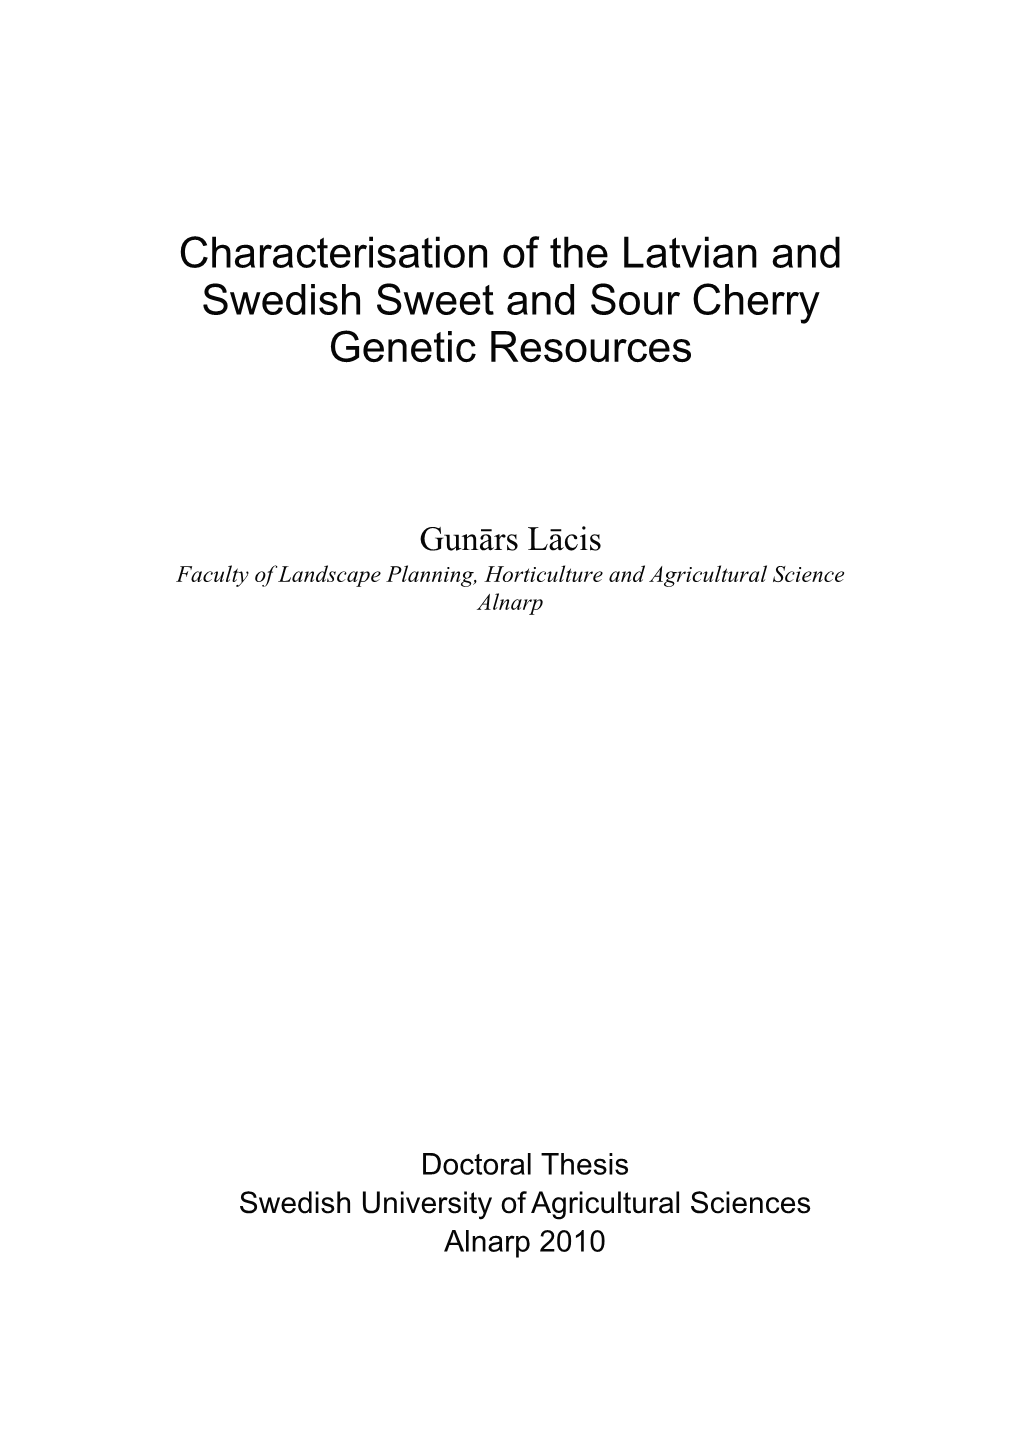 Characterisation of the Latvian and Swedish Sweet and Sour Cherry Genetic Resources